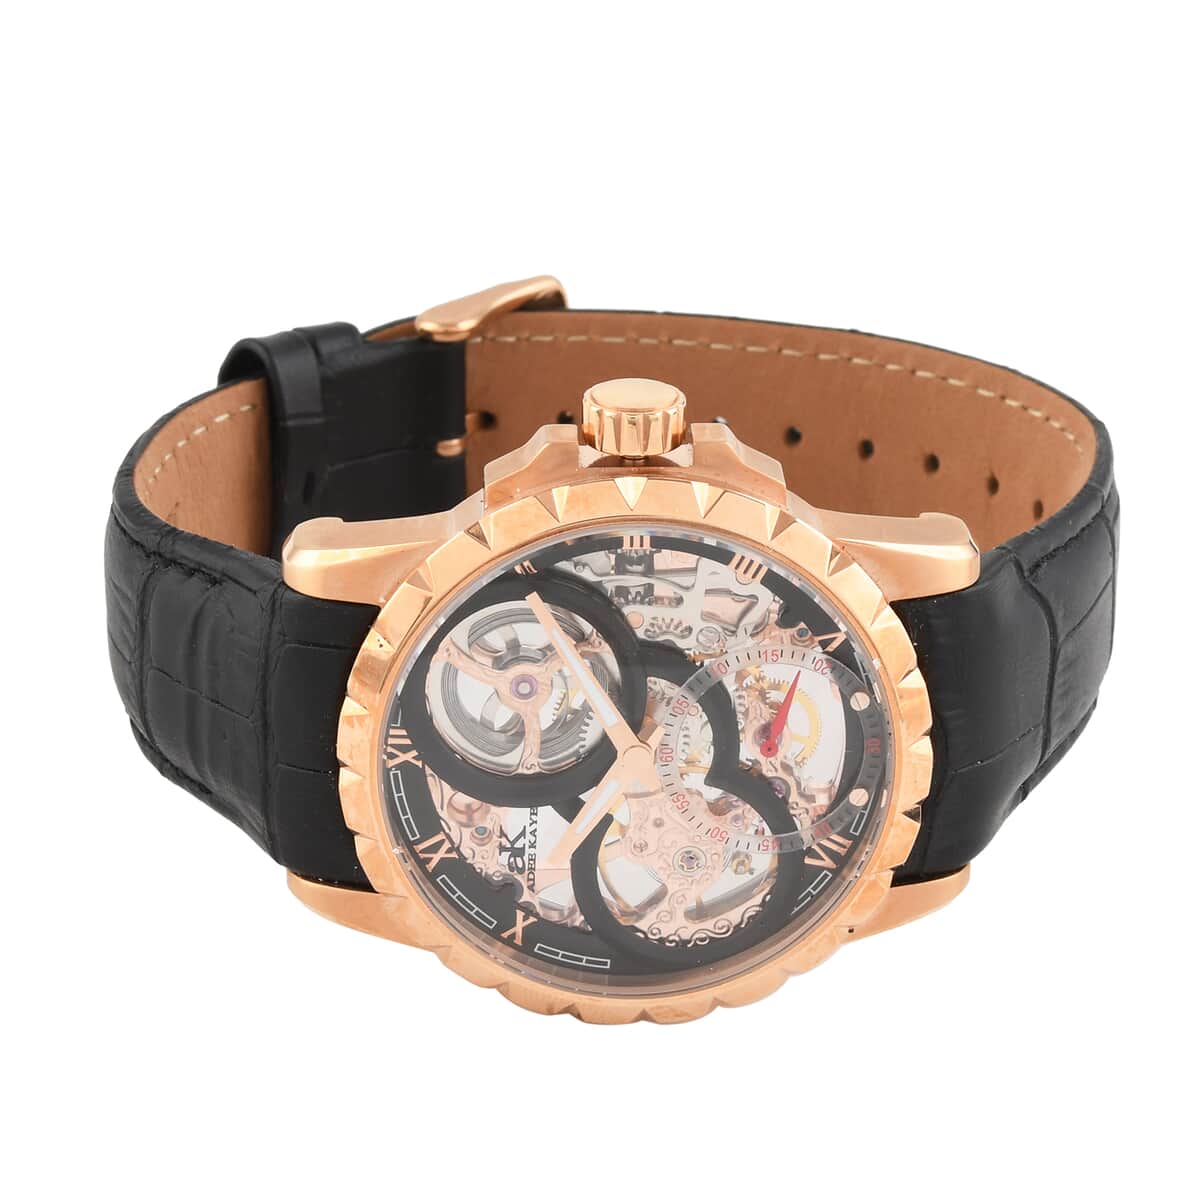 ADEE KAYE La Gear Mechanical Movement Watch with Genuine Leather Strap in Black (48mm) image number 2